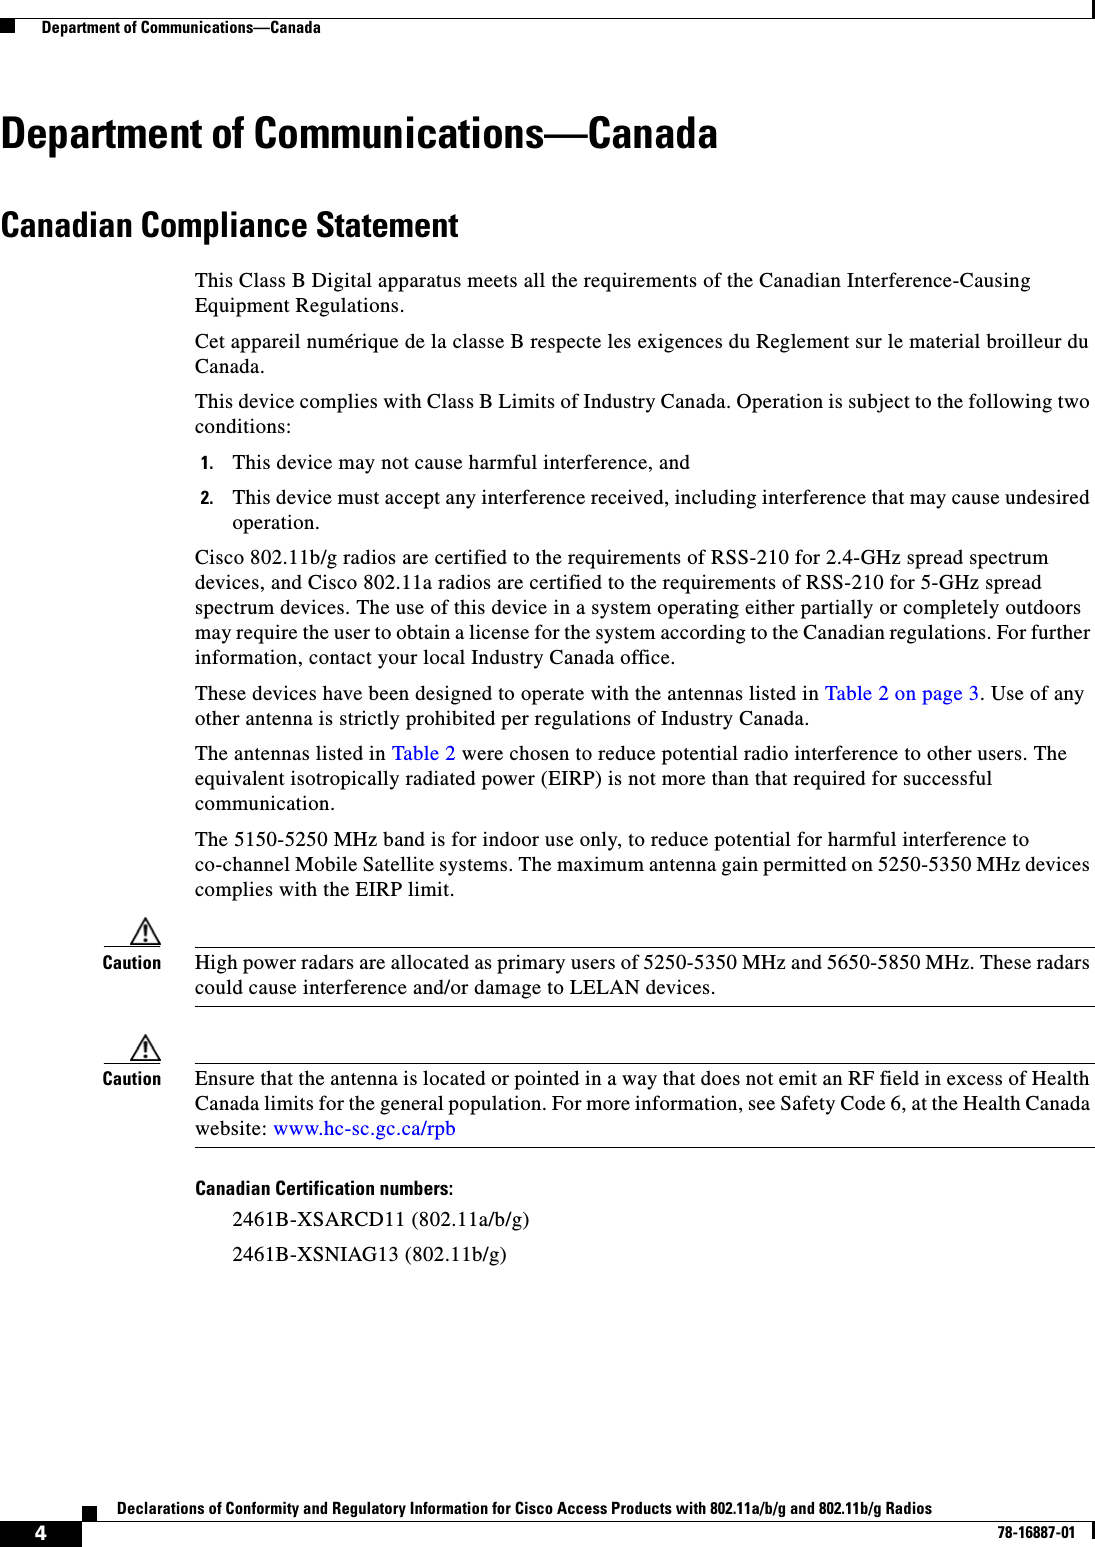  4Declarations of Conformity and Regulatory Information for Cisco Access Products with 802.11a/b/g and 802.11b/g Radios78-16887-01  Department of Communications—CanadaDepartment of Communications—CanadaCanadian Compliance StatementThis Class B Digital apparatus meets all the requirements of the Canadian Interference-Causing Equipment Regulations.Cet appareil numérique de la classe B respecte les exigences du Reglement sur le material broilleur du Canada.This device complies with Class B Limits of Industry Canada. Operation is subject to the following two conditions:1. This device may not cause harmful interference, and2. This device must accept any interference received, including interference that may cause undesired operation.Cisco 802.11b/g radios are certified to the requirements of RSS-210 for 2.4-GHz spread spectrum devices, and Cisco 802.11a radios are certified to the requirements of RSS-210 for 5-GHz spread spectrum devices. The use of this device in a system operating either partially or completely outdoors may require the user to obtain a license for the system according to the Canadian regulations. For further information, contact your local Industry Canada office.These devices have been designed to operate with the antennas listed in Table 2 on page 3. Use of any other antenna is strictly prohibited per regulations of Industry Canada.The antennas listed in Table 2 were chosen to reduce potential radio interference to other users. The equivalent isotropically radiated power (EIRP) is not more than that required for successful communication.The 5150-5250 MHz band is for indoor use only, to reduce potential for harmful interference to co-channel Mobile Satellite systems. The maximum antenna gain permitted on 5250-5350 MHz devices complies with the EIRP limit.Caution High power radars are allocated as primary users of 5250-5350 MHz and 5650-5850 MHz. These radars could cause interference and/or damage to LELAN devices.Caution Ensure that the antenna is located or pointed in a way that does not emit an RF field in excess of Health Canada limits for the general population. For more information, see Safety Code 6, at the Health Canada website: www.hc-sc.gc.ca/rpbCanadian Certification numbers:2461B-XSARCD11 (802.11a/b/g)2461B-XSNIAG13 (802.11b/g)